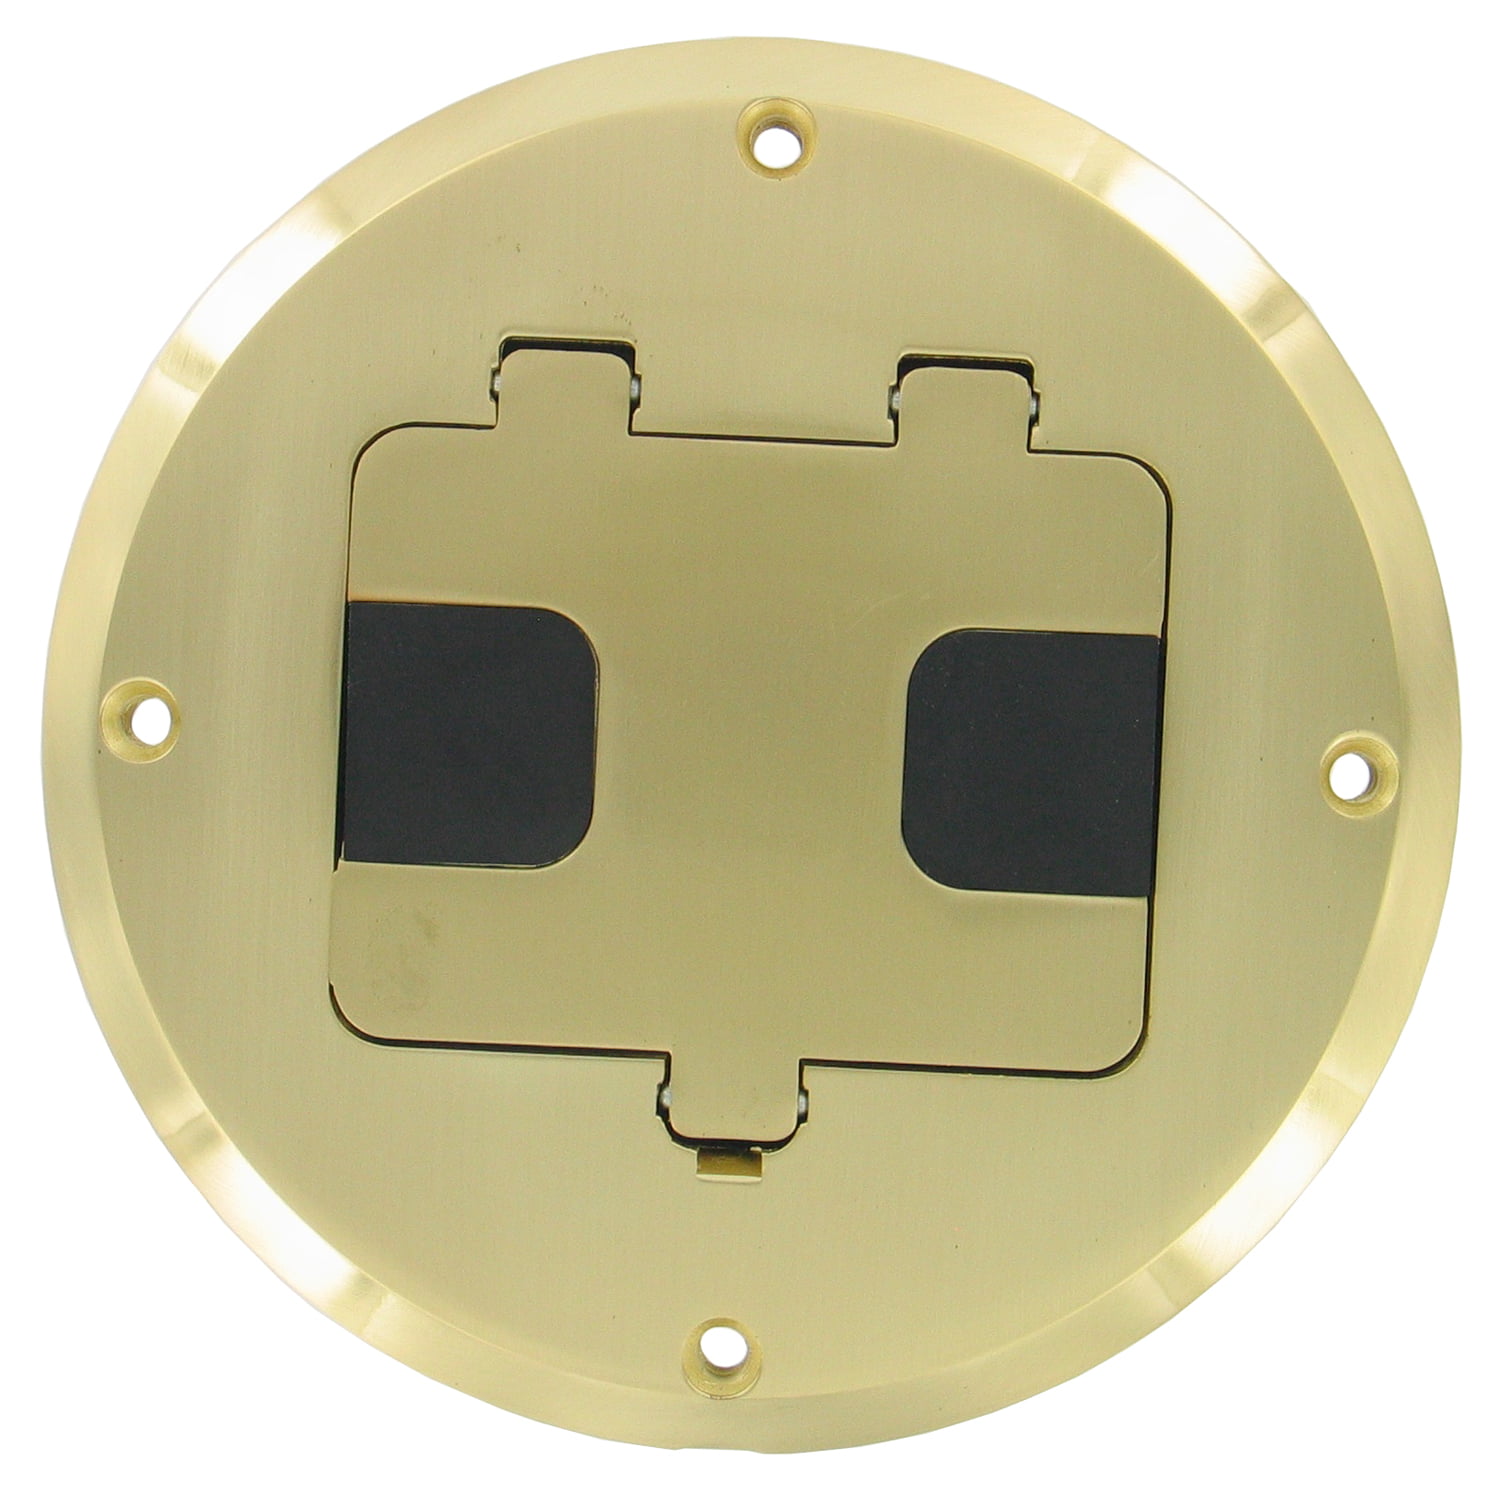 Hubbell S3825 Brass Round Floor Box Rect Duplex Flap Cover 